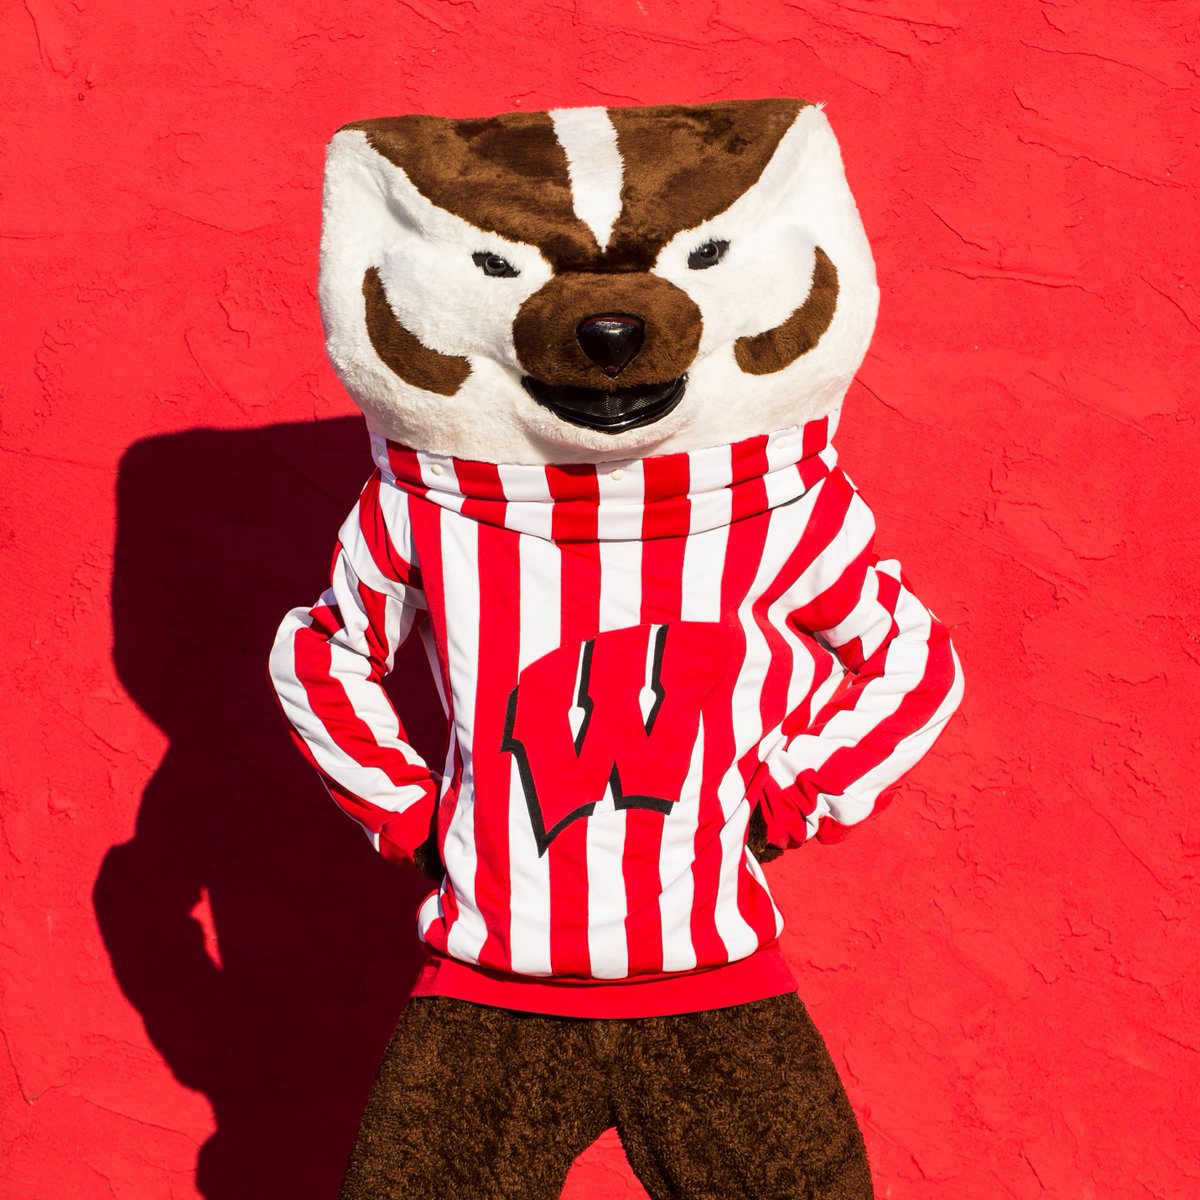 Proud to be a Wisconsin Badger today and every day! #DayoftheBadger Support here: dayofthebadger.org/campaign/indus… @UWMadison @UWMadEngr @WisAlumni